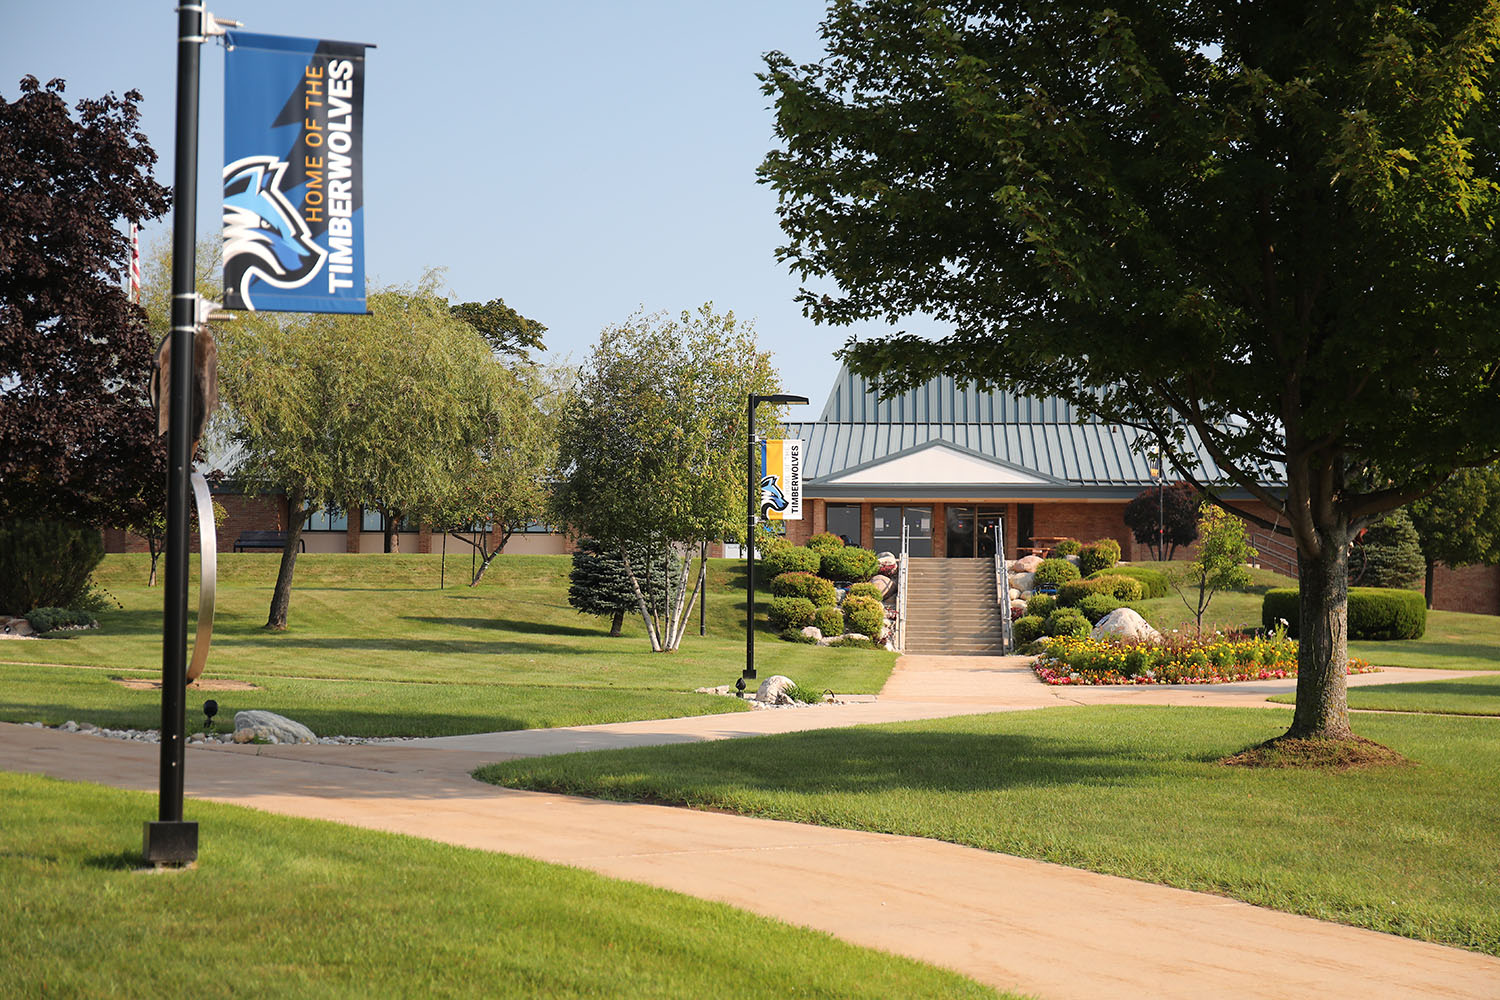 Campus banners